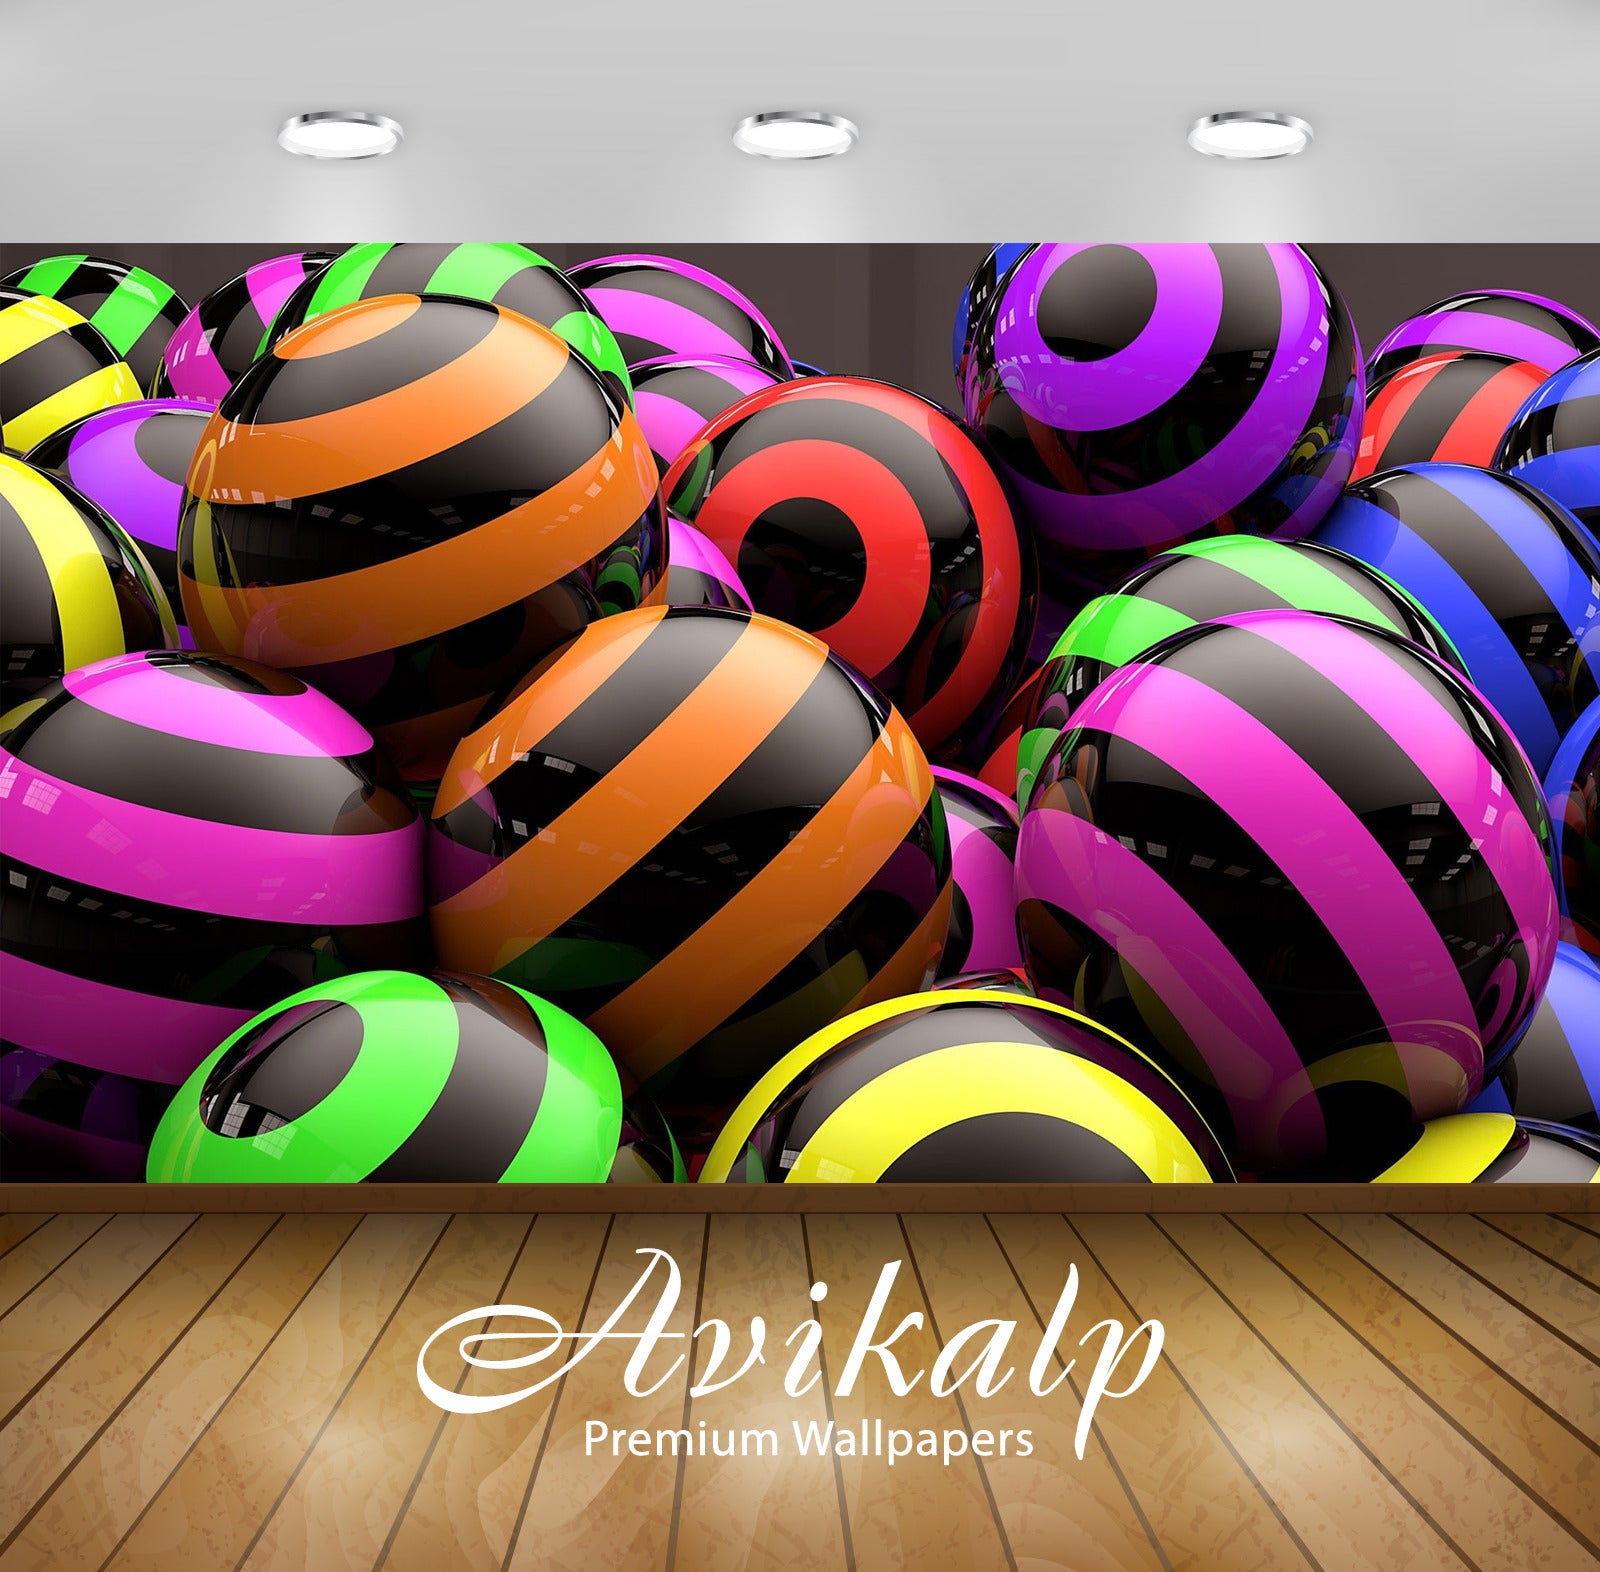 Avikalp Exclusive Awi4005 Striped Colorful Spheres Full HD Wallpapers for Living room, Hall, Kids Ro